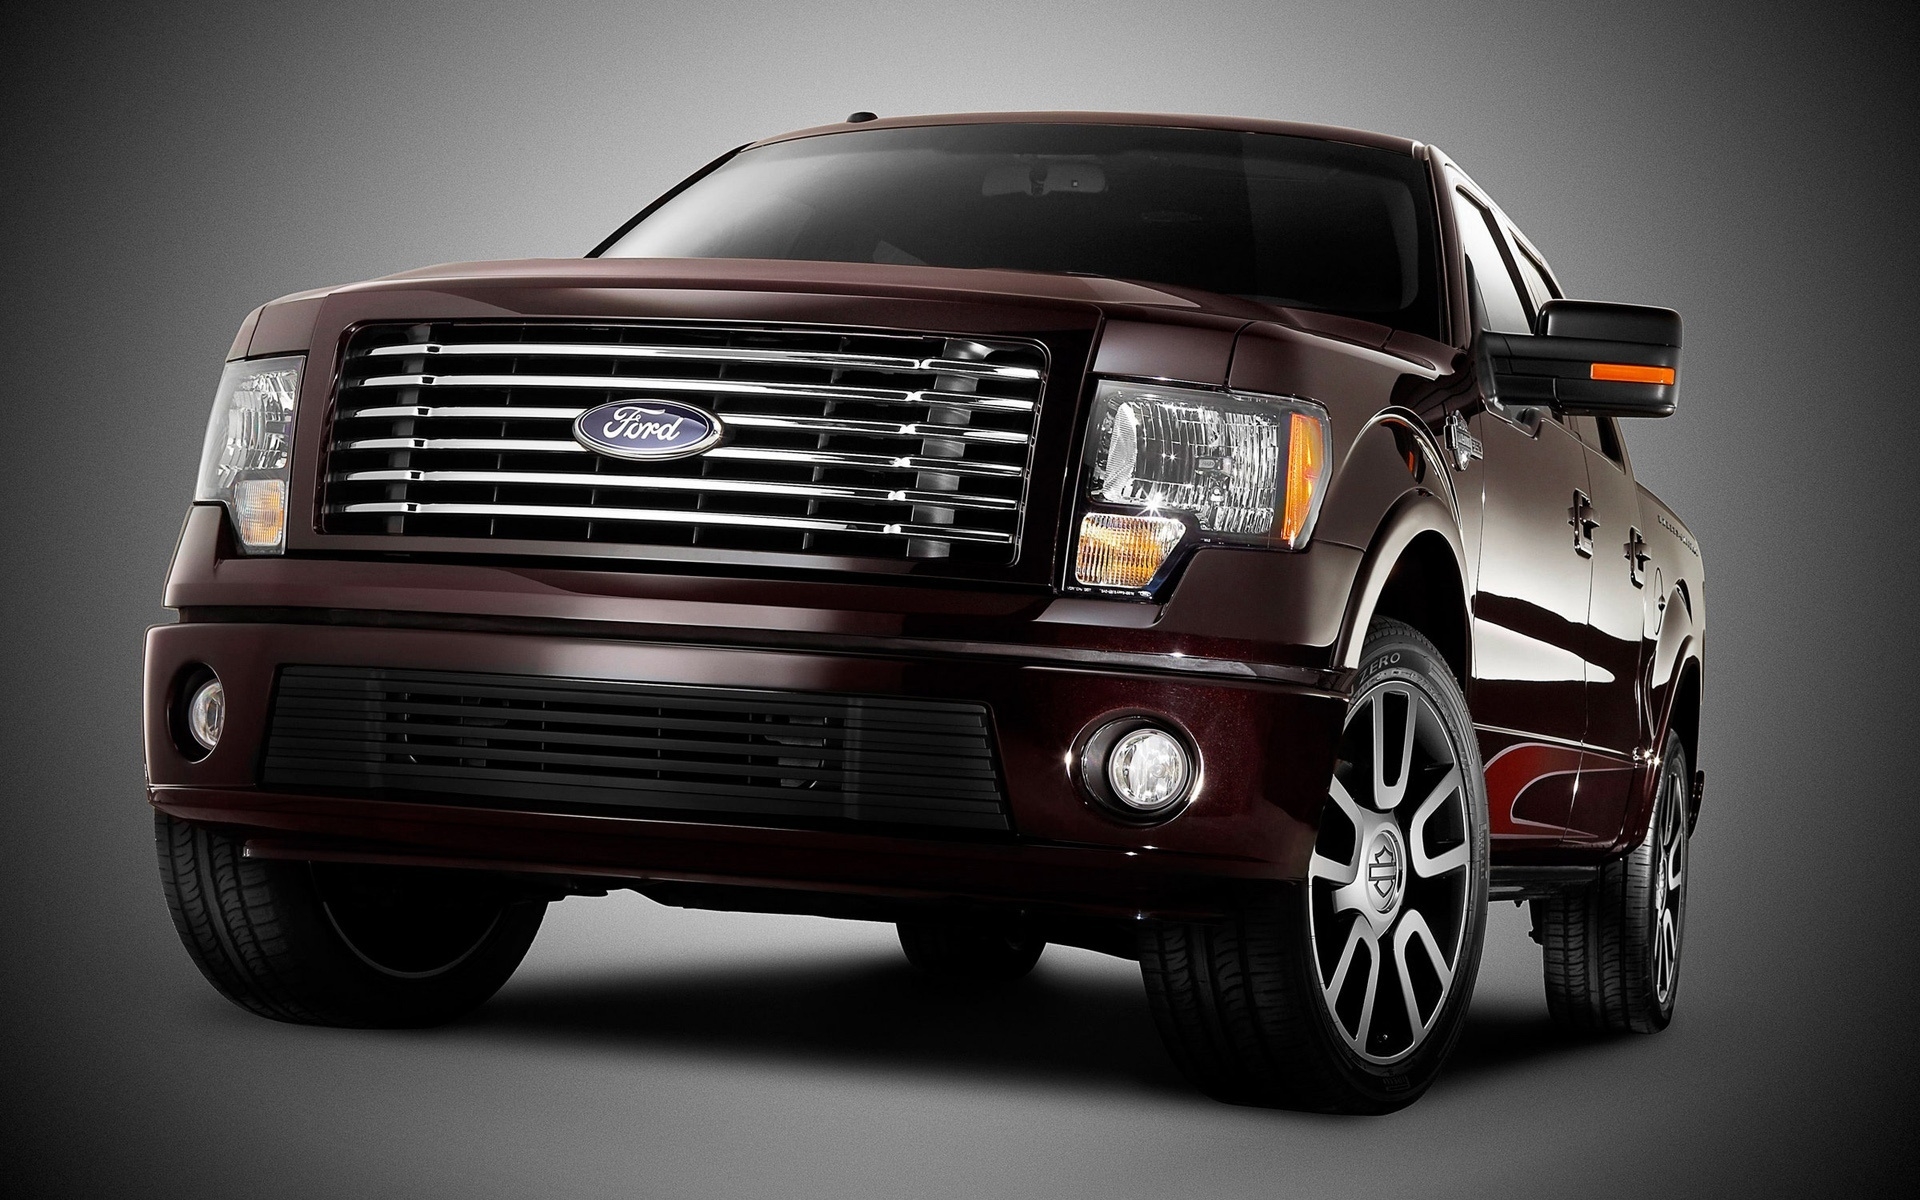 Ford F-150 Harley-Davidson 2010 for 1920 x 1200 widescreen resolution